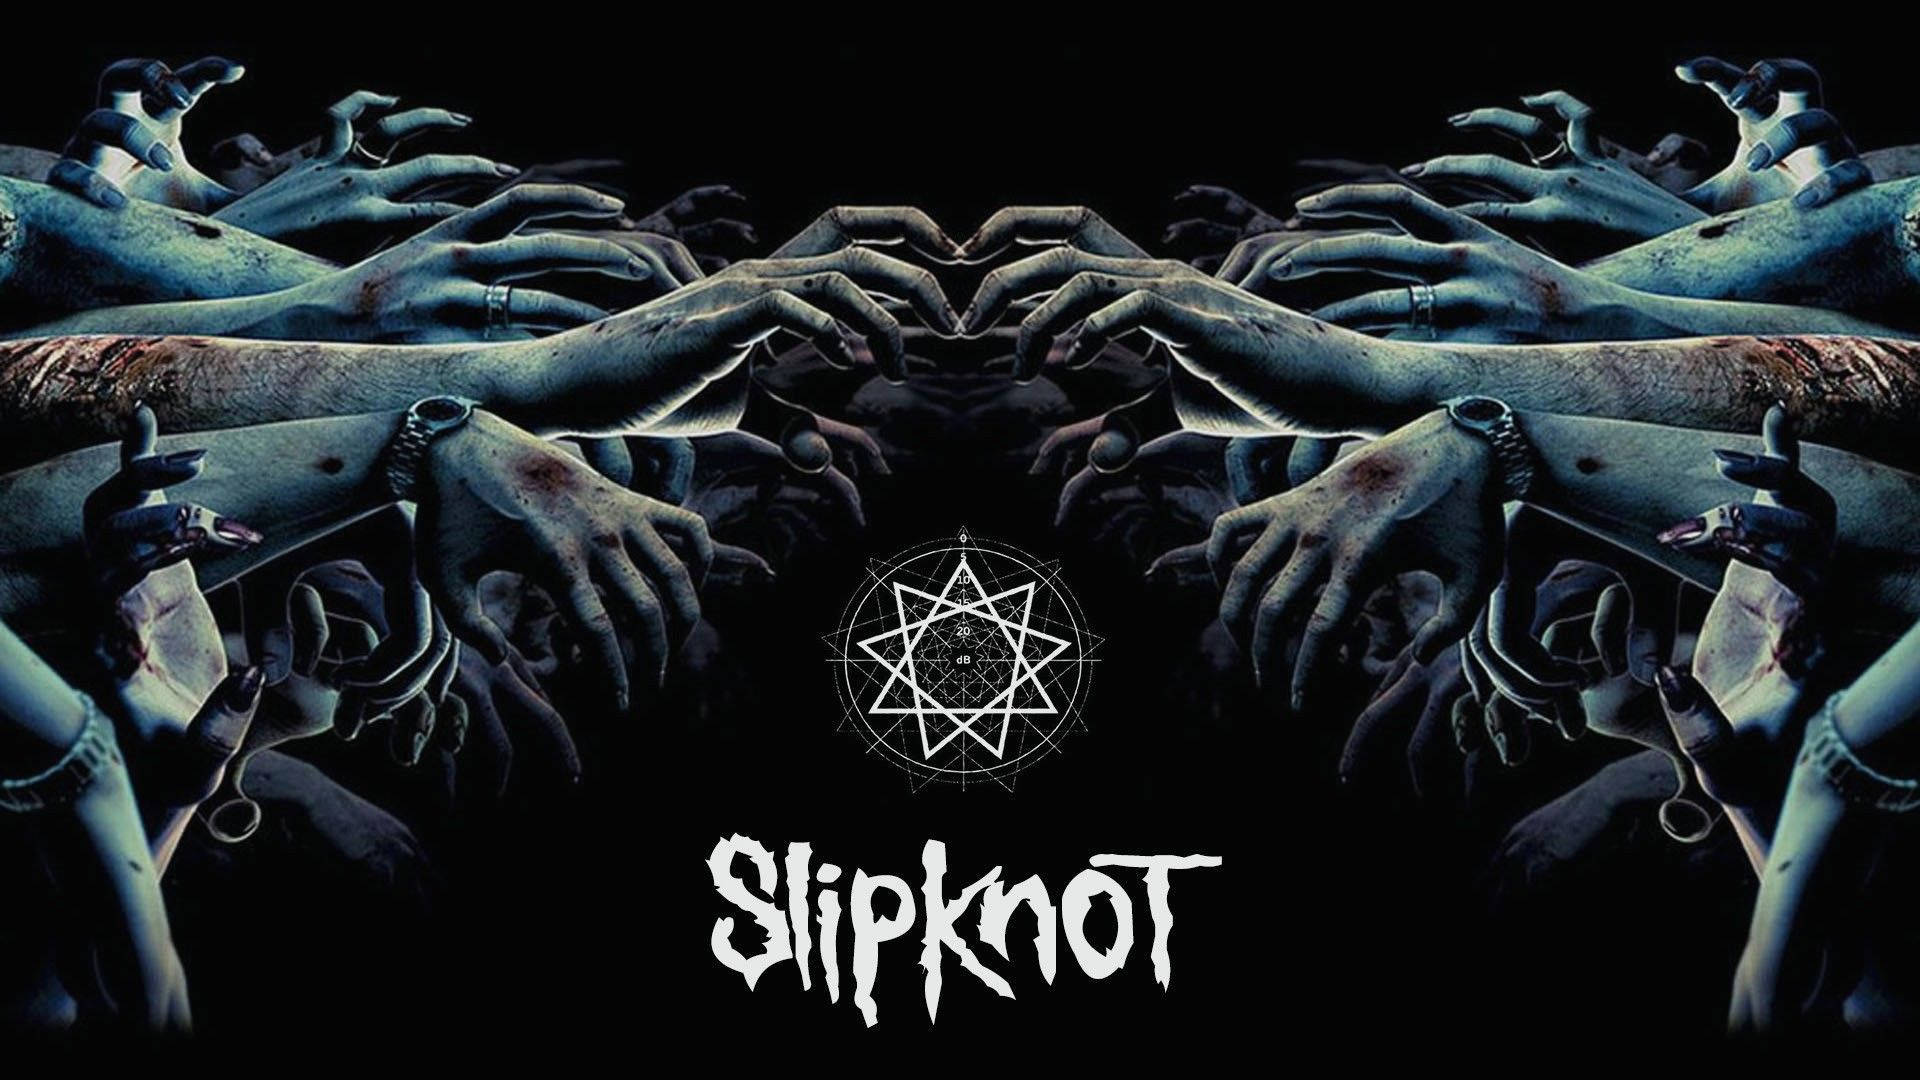 Slipknot Logo With Hands Reaching Background